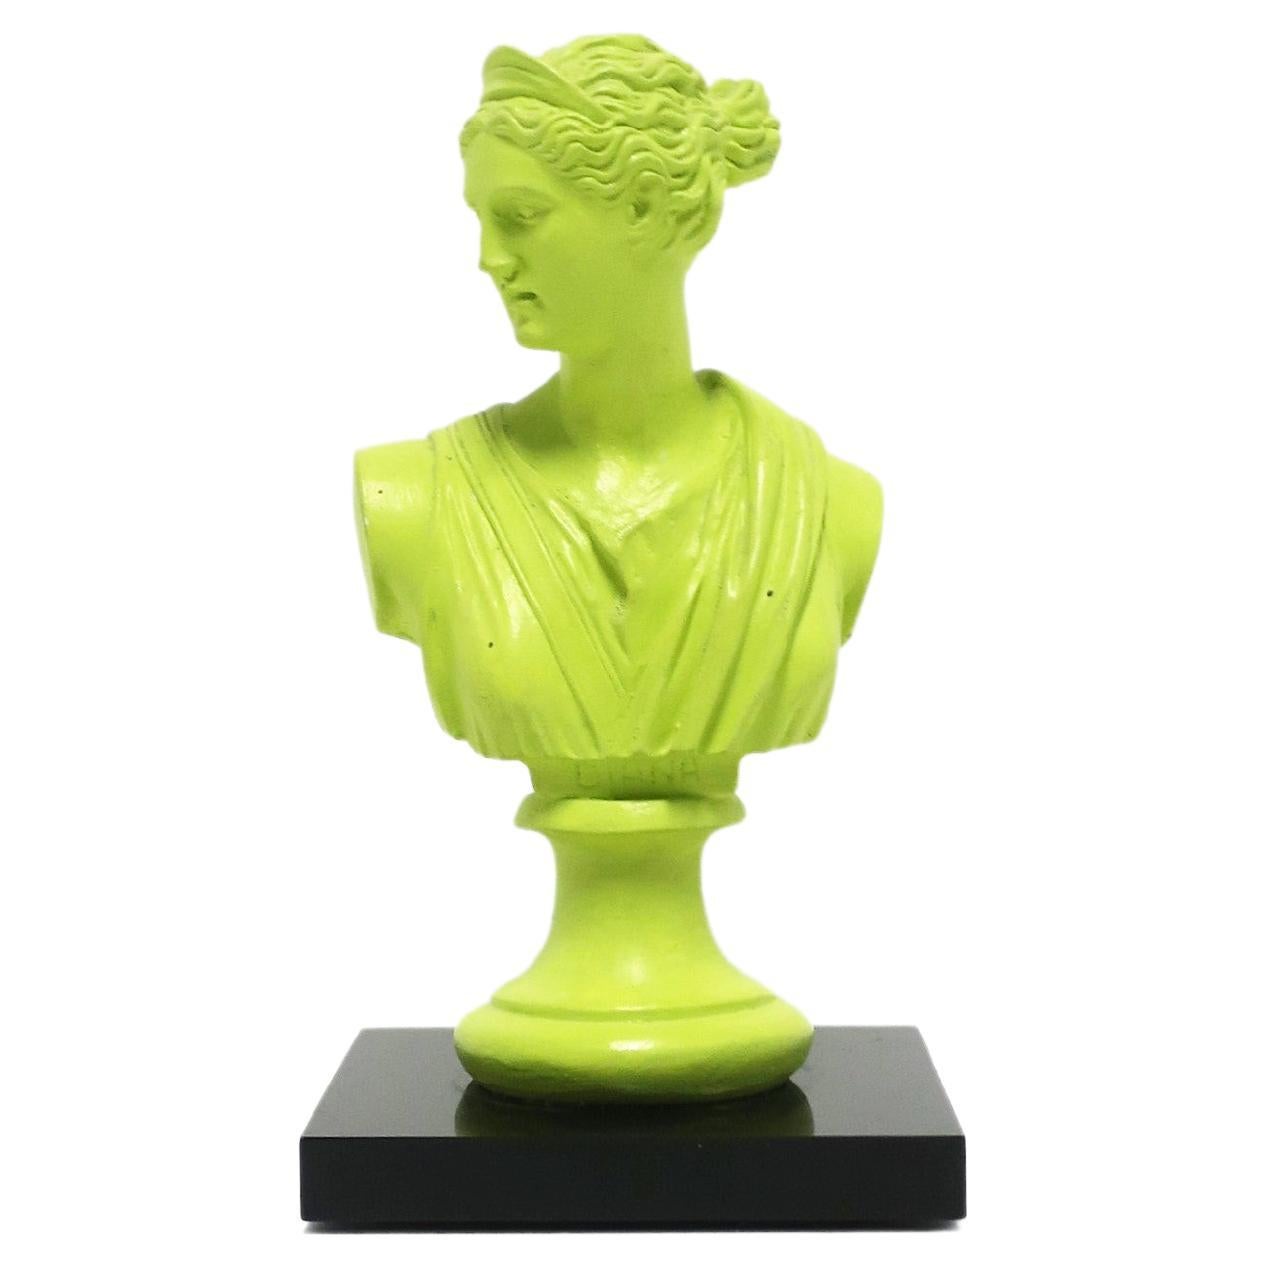 Neoclassical Bust Statue in Neon Green on Black Base